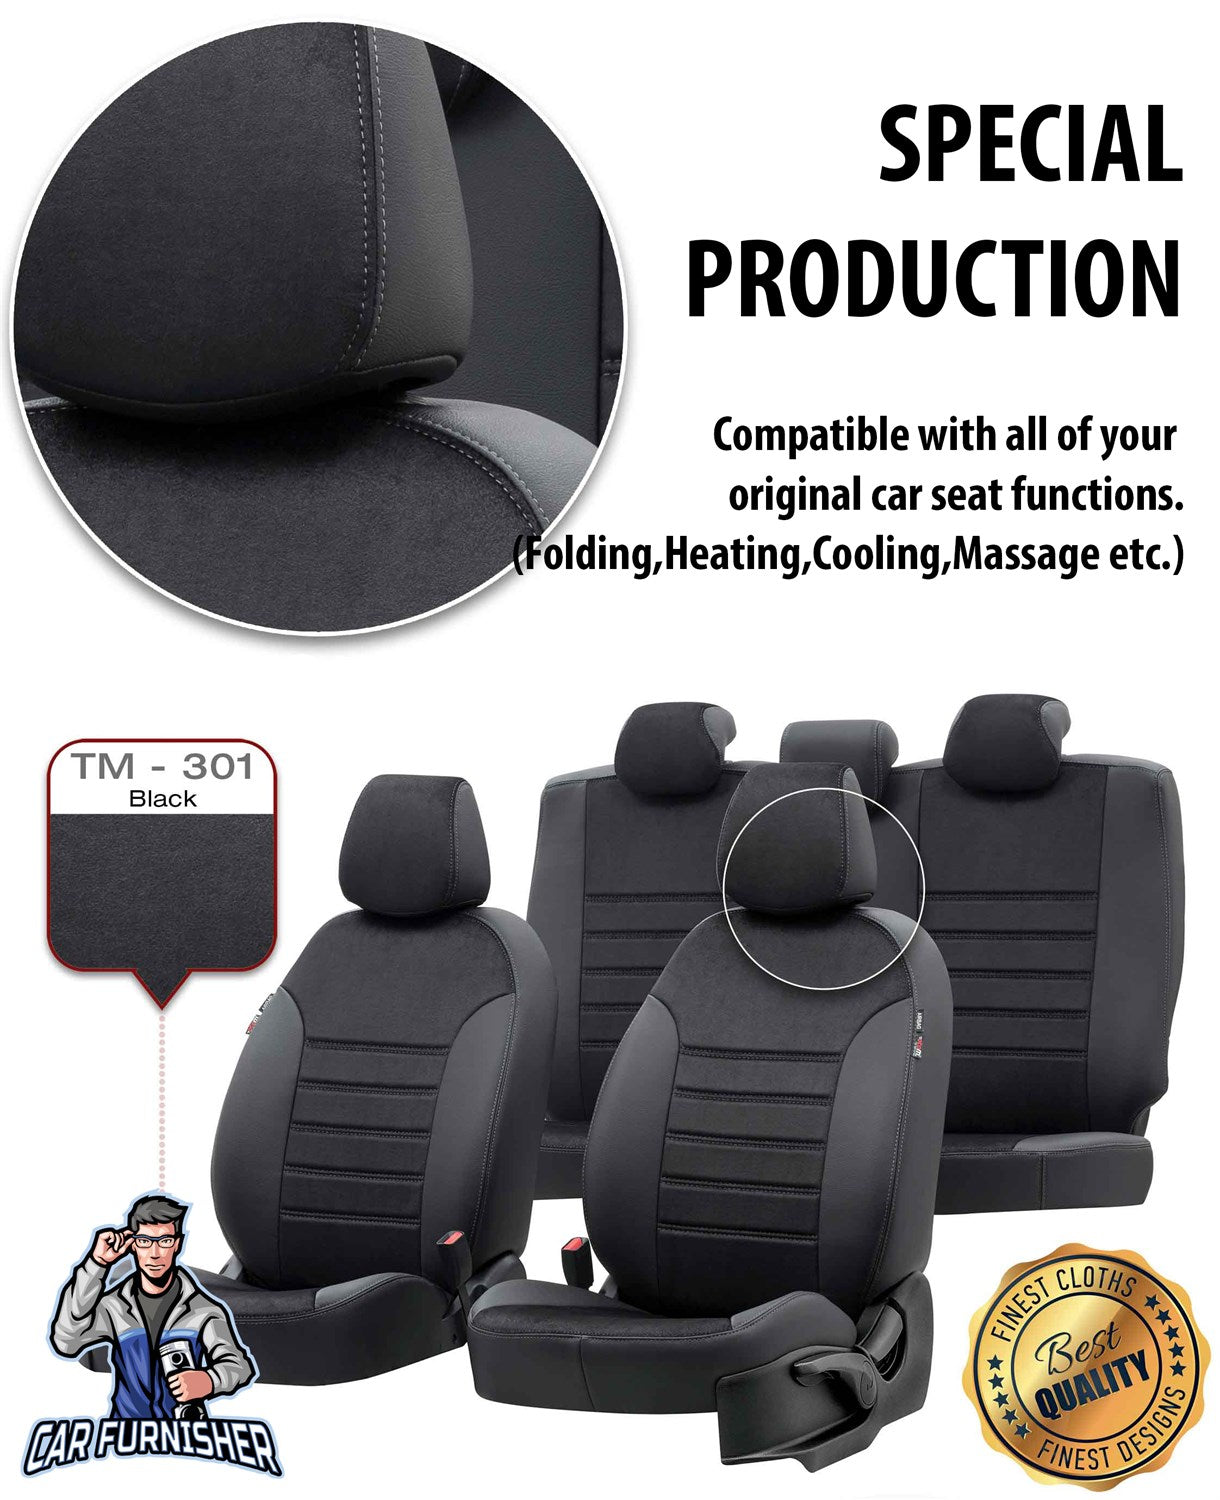 Volkswagen Jetta Seat Cover Milano Suede Design Smoked Black Leather & Suede Fabric